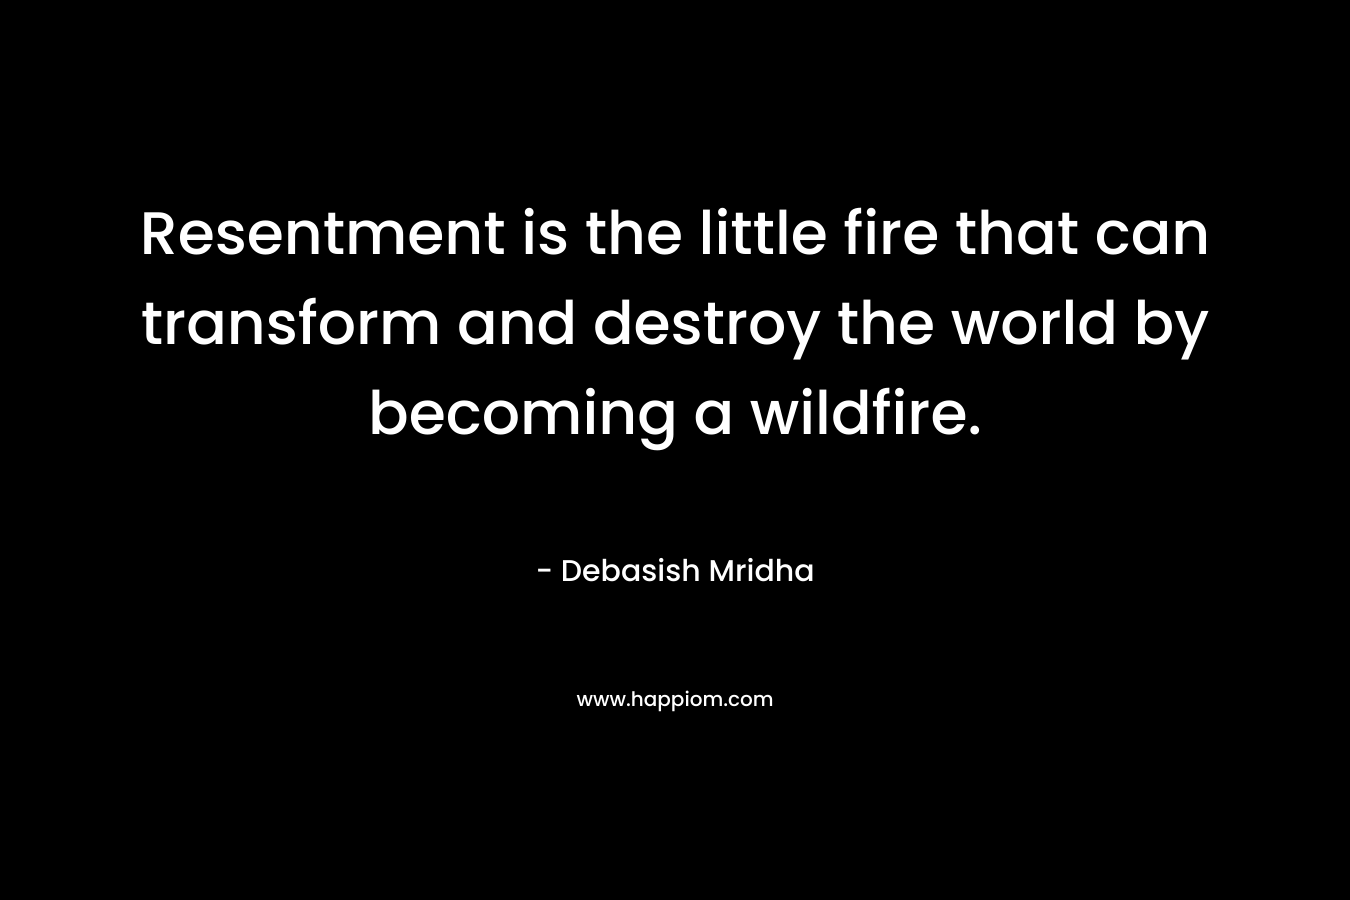 Resentment is the little fire that can transform and destroy the world by becoming a wildfire. – Debasish Mridha